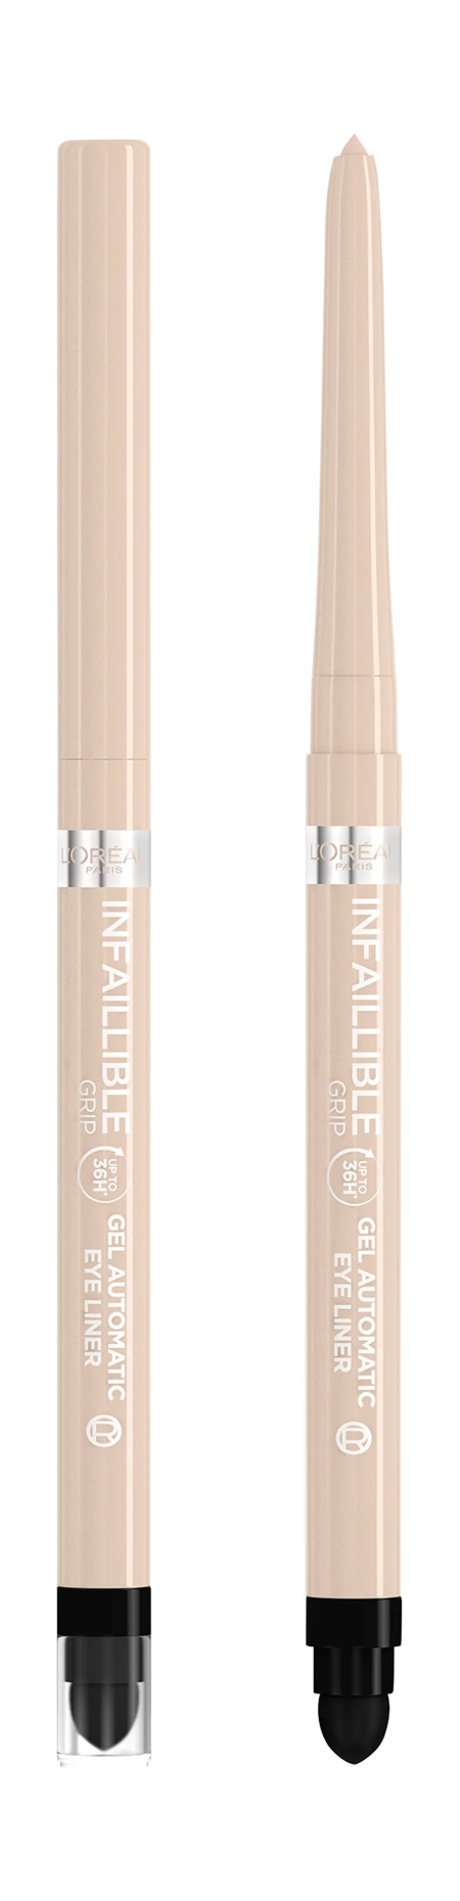 L'Oreal Infaillible Grip Gel Automatic Eye Liner